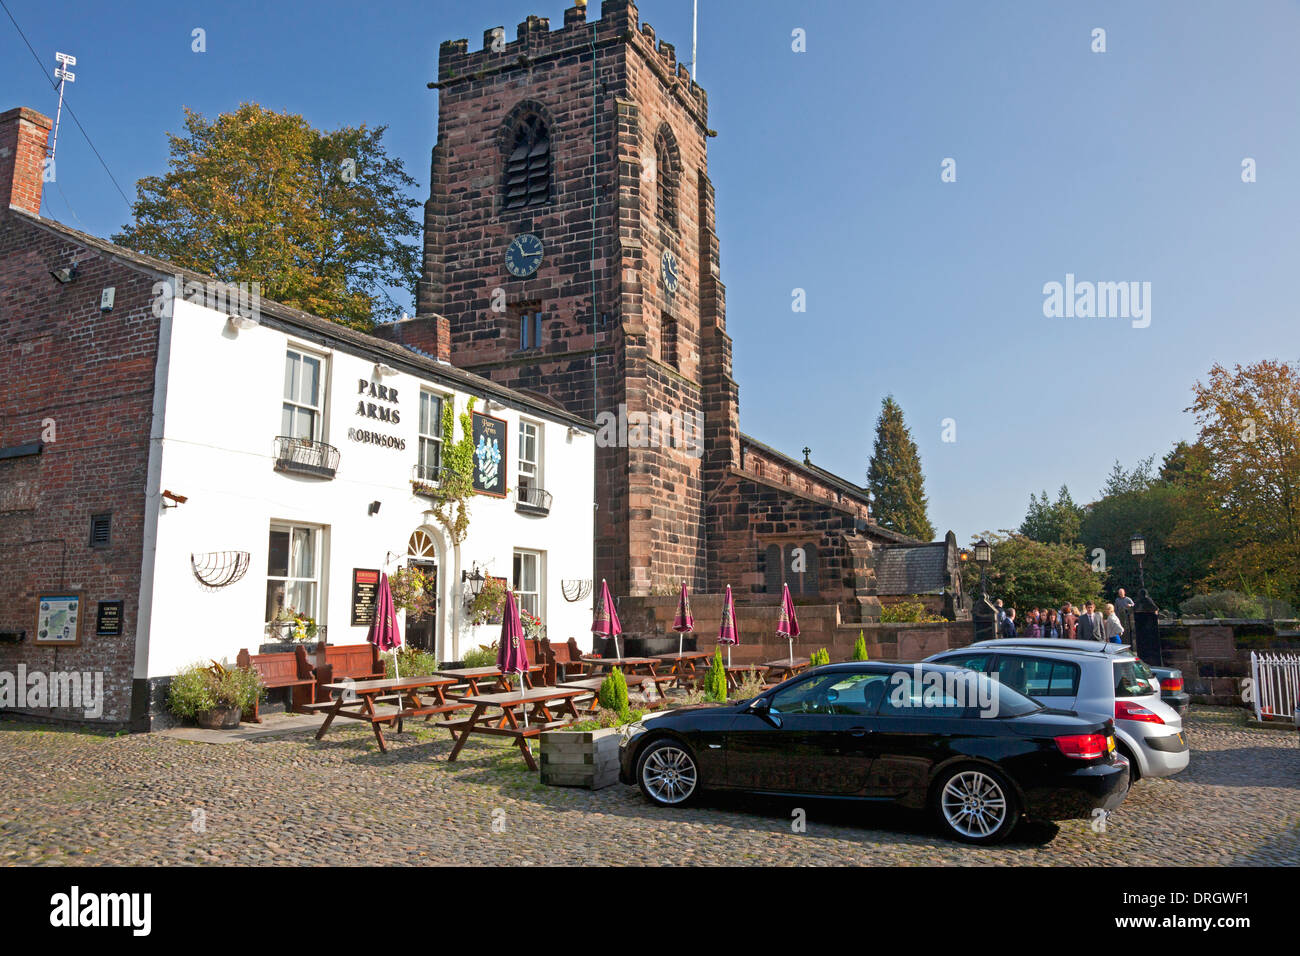 The Parr Arms pub beside St Wilfrid's Church, Grappenhall, Cheshire Stock Photo